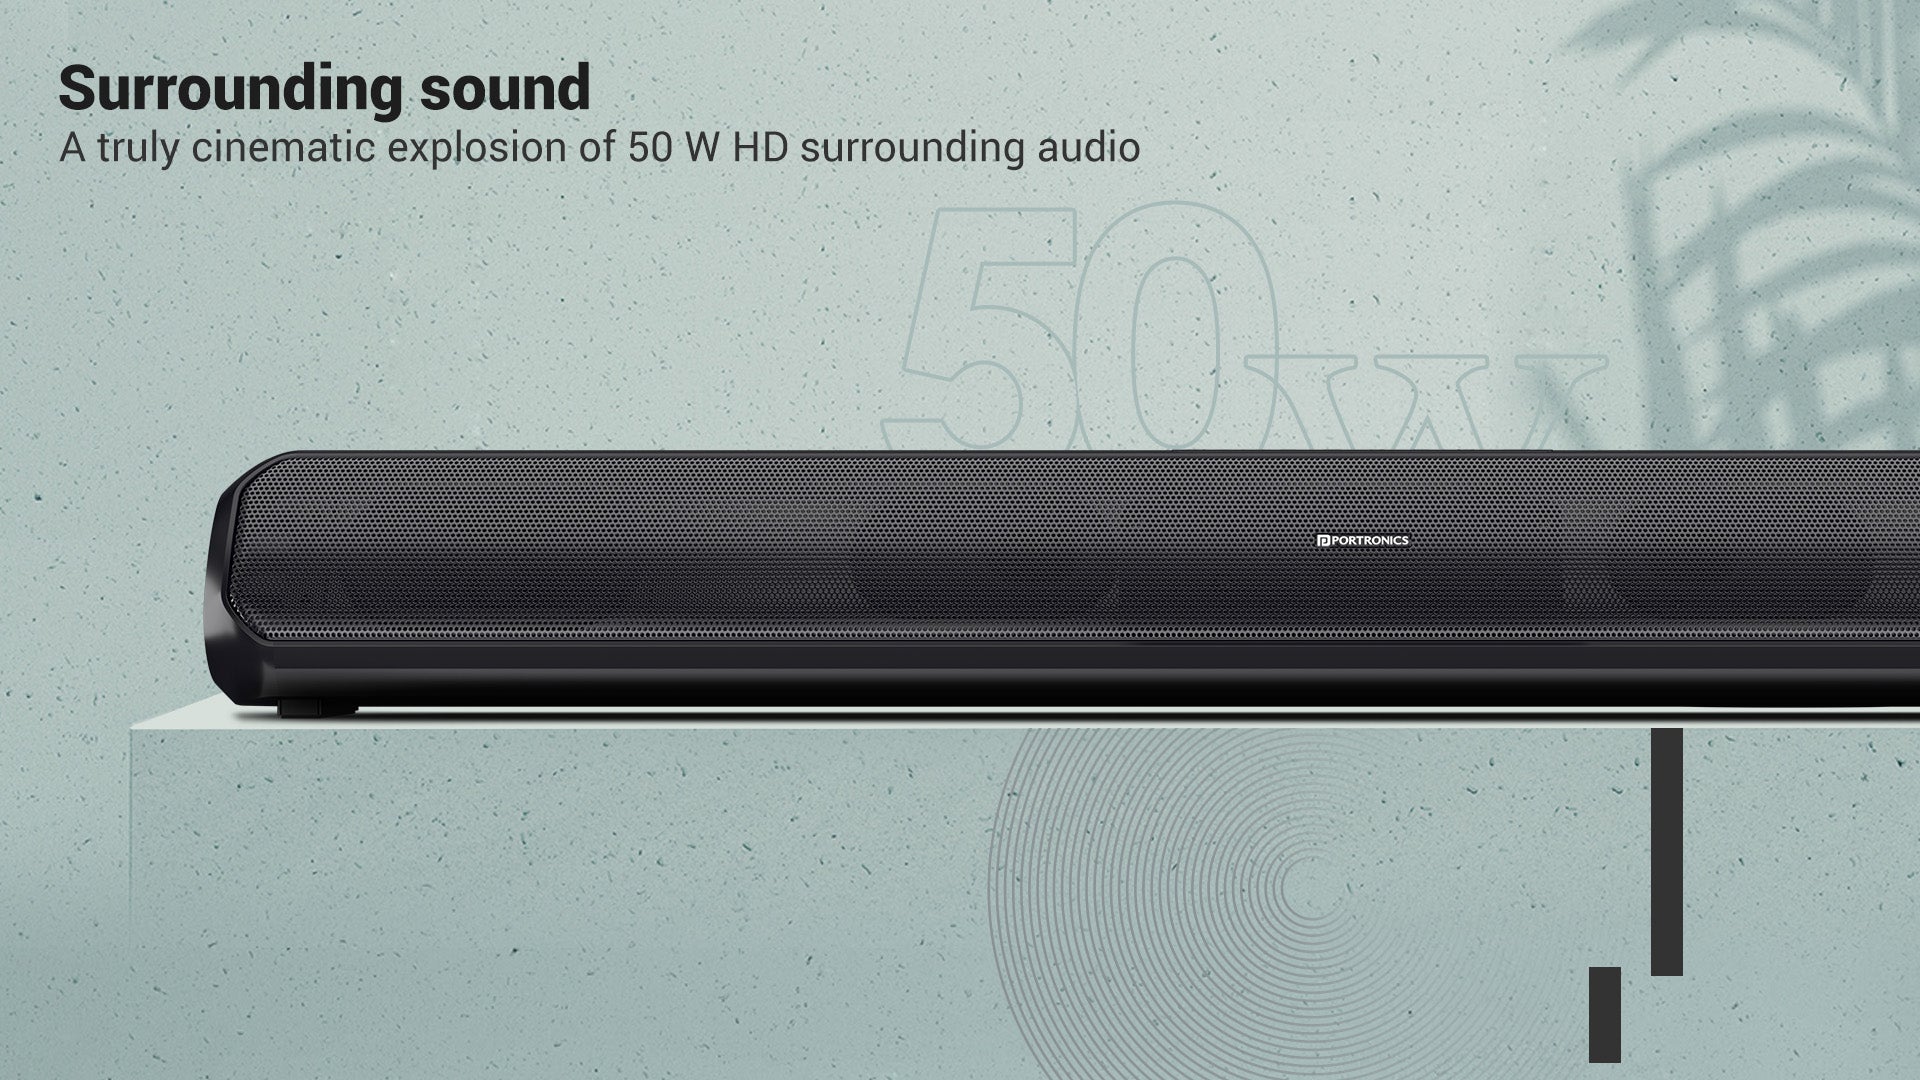 Portronics Sound Slick 7 50W Bluetooth Soundbar speaker  The perfect mode to witness popcorn blockbusters or indies with Virtual 3D surround technology that brings theatre to your living room.